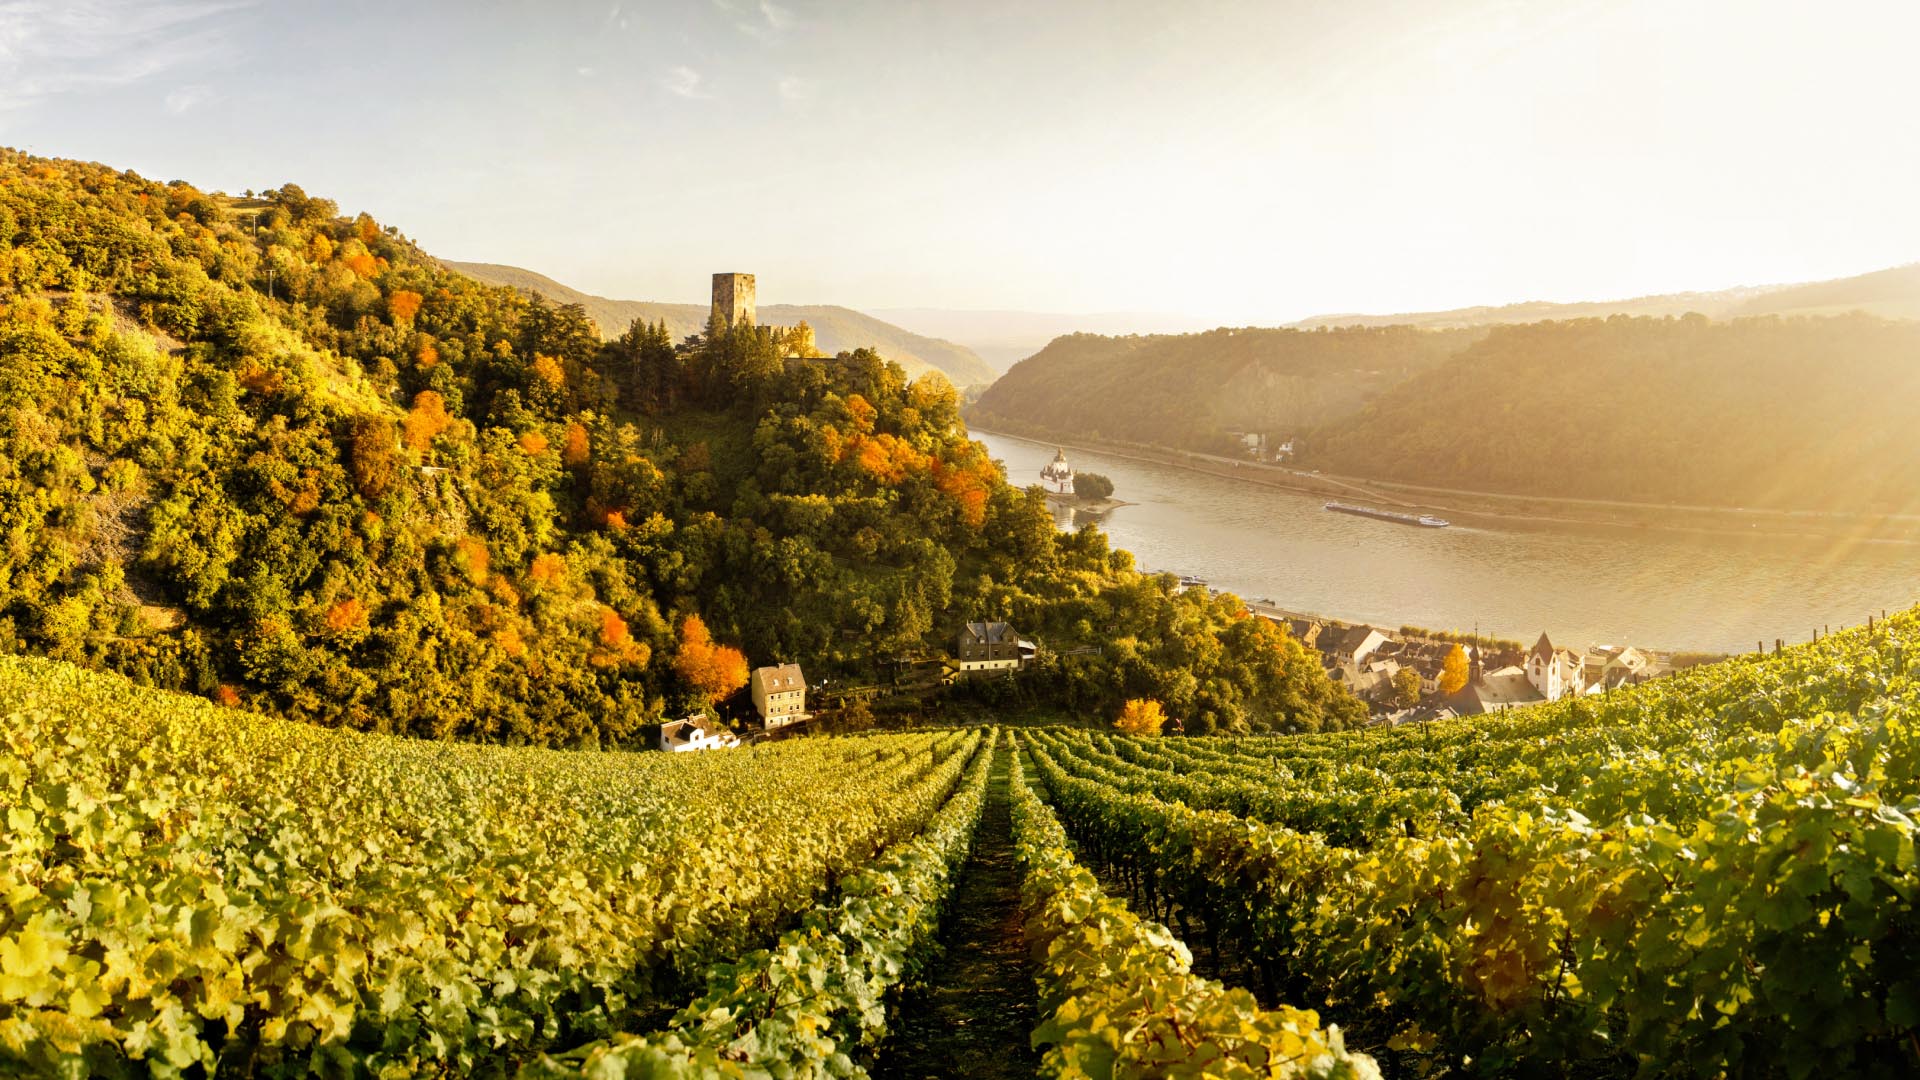 Stage, view over the grapevines on the Middle Rhine